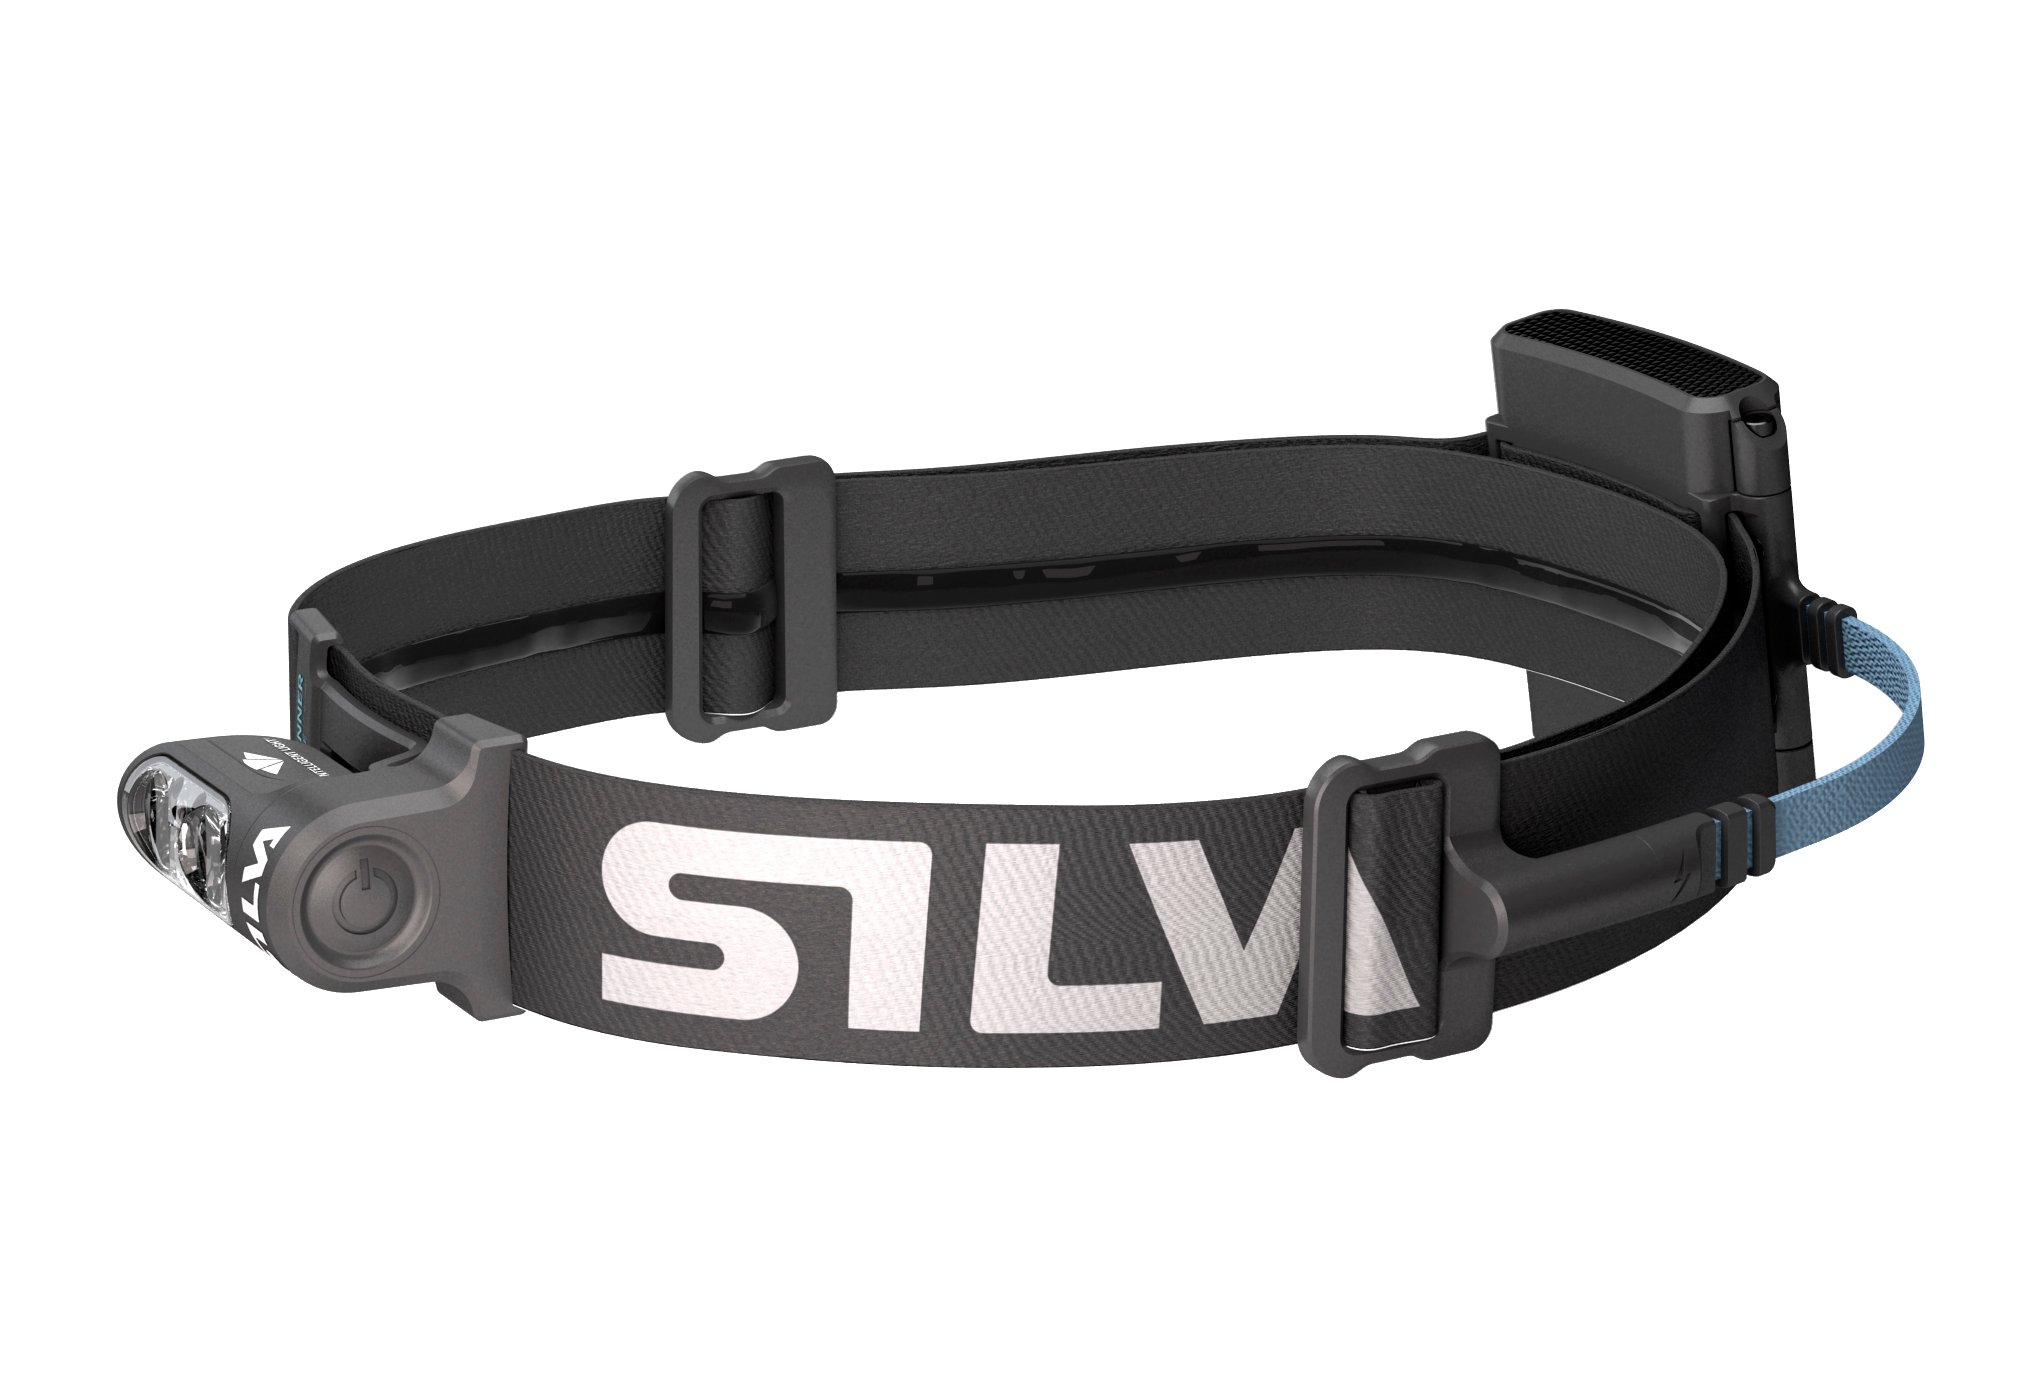 Silva Trail Runner Free Lampe frontale / éclairage